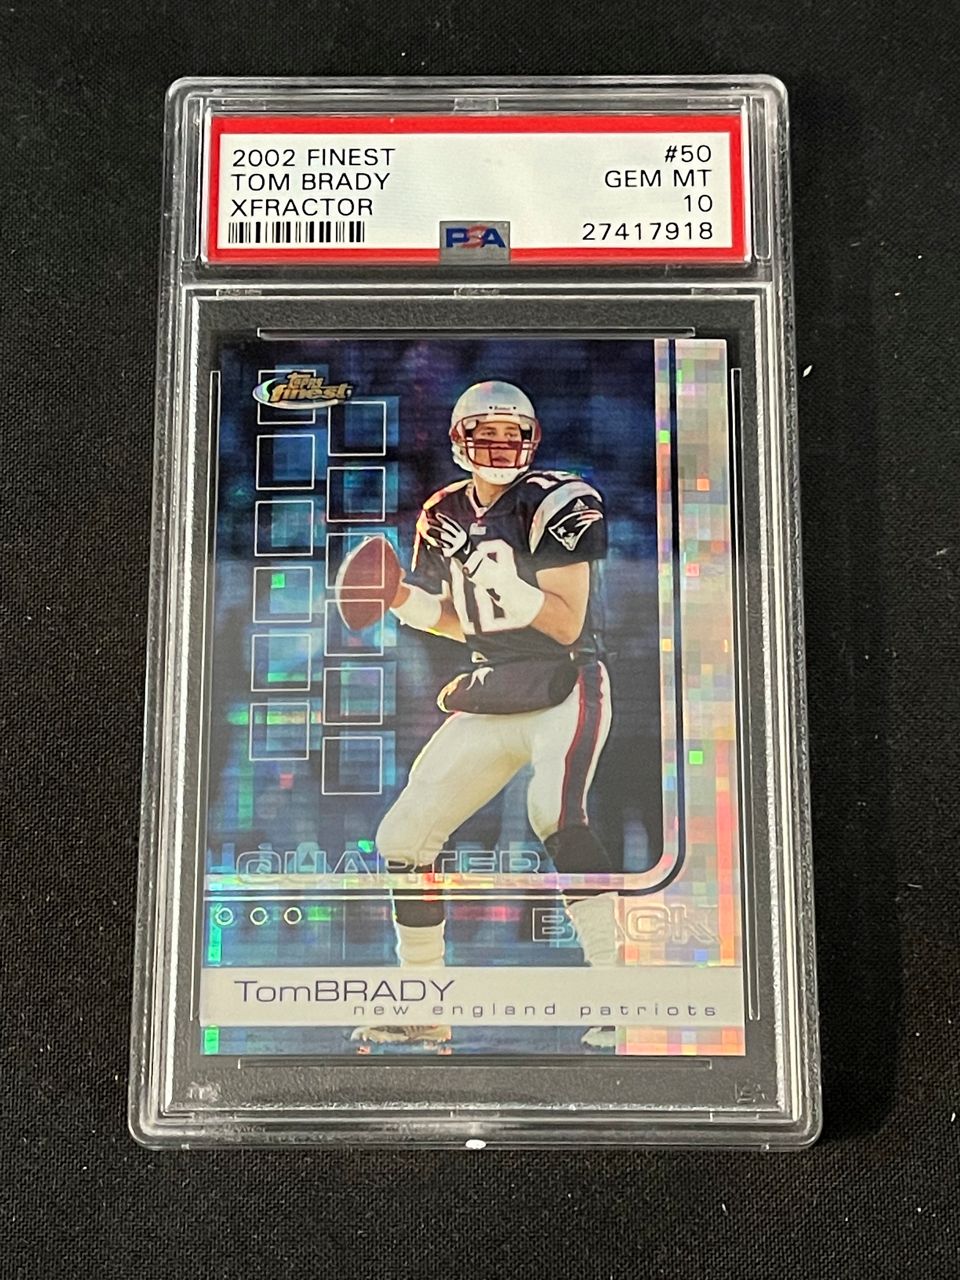 In this photo provided by Saco River Auction LLC, a 2002 Topps Finest X-Fractor card showing football quarterback Tom Brady rests inside a transparent case, Wednesday, Jan. 19, 2022, in Gorham, Maine. Troy Thibodeau from Saco River Auction estimates the card will fetch six figures when it's auctioned on Jan. 31. (Photo by Troy Thibodeau/Saco River Auction LLC via the Associated Press).